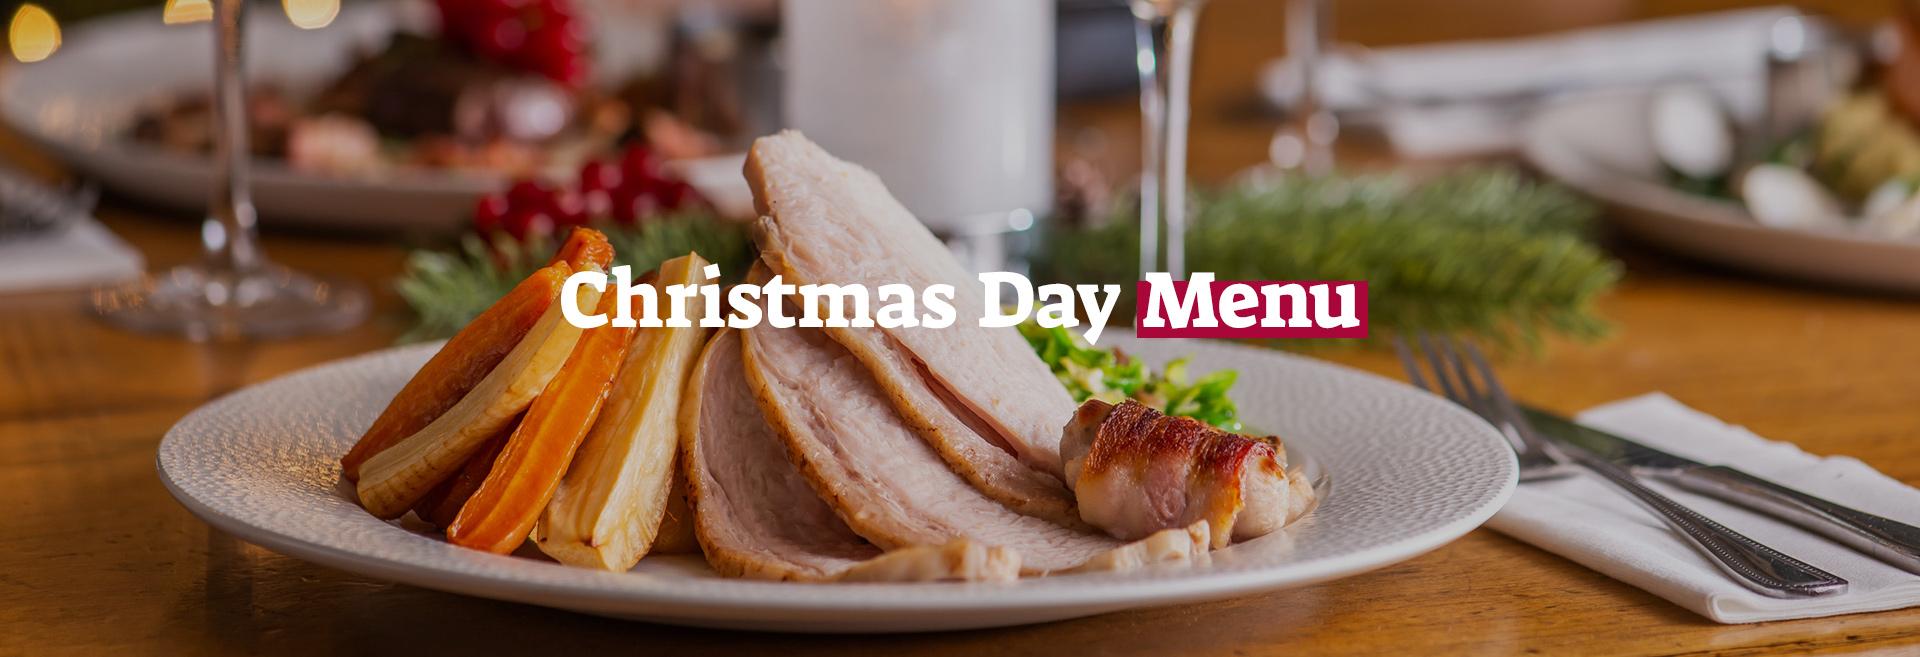 Christmas Day Menu at The Lyttelton Arms